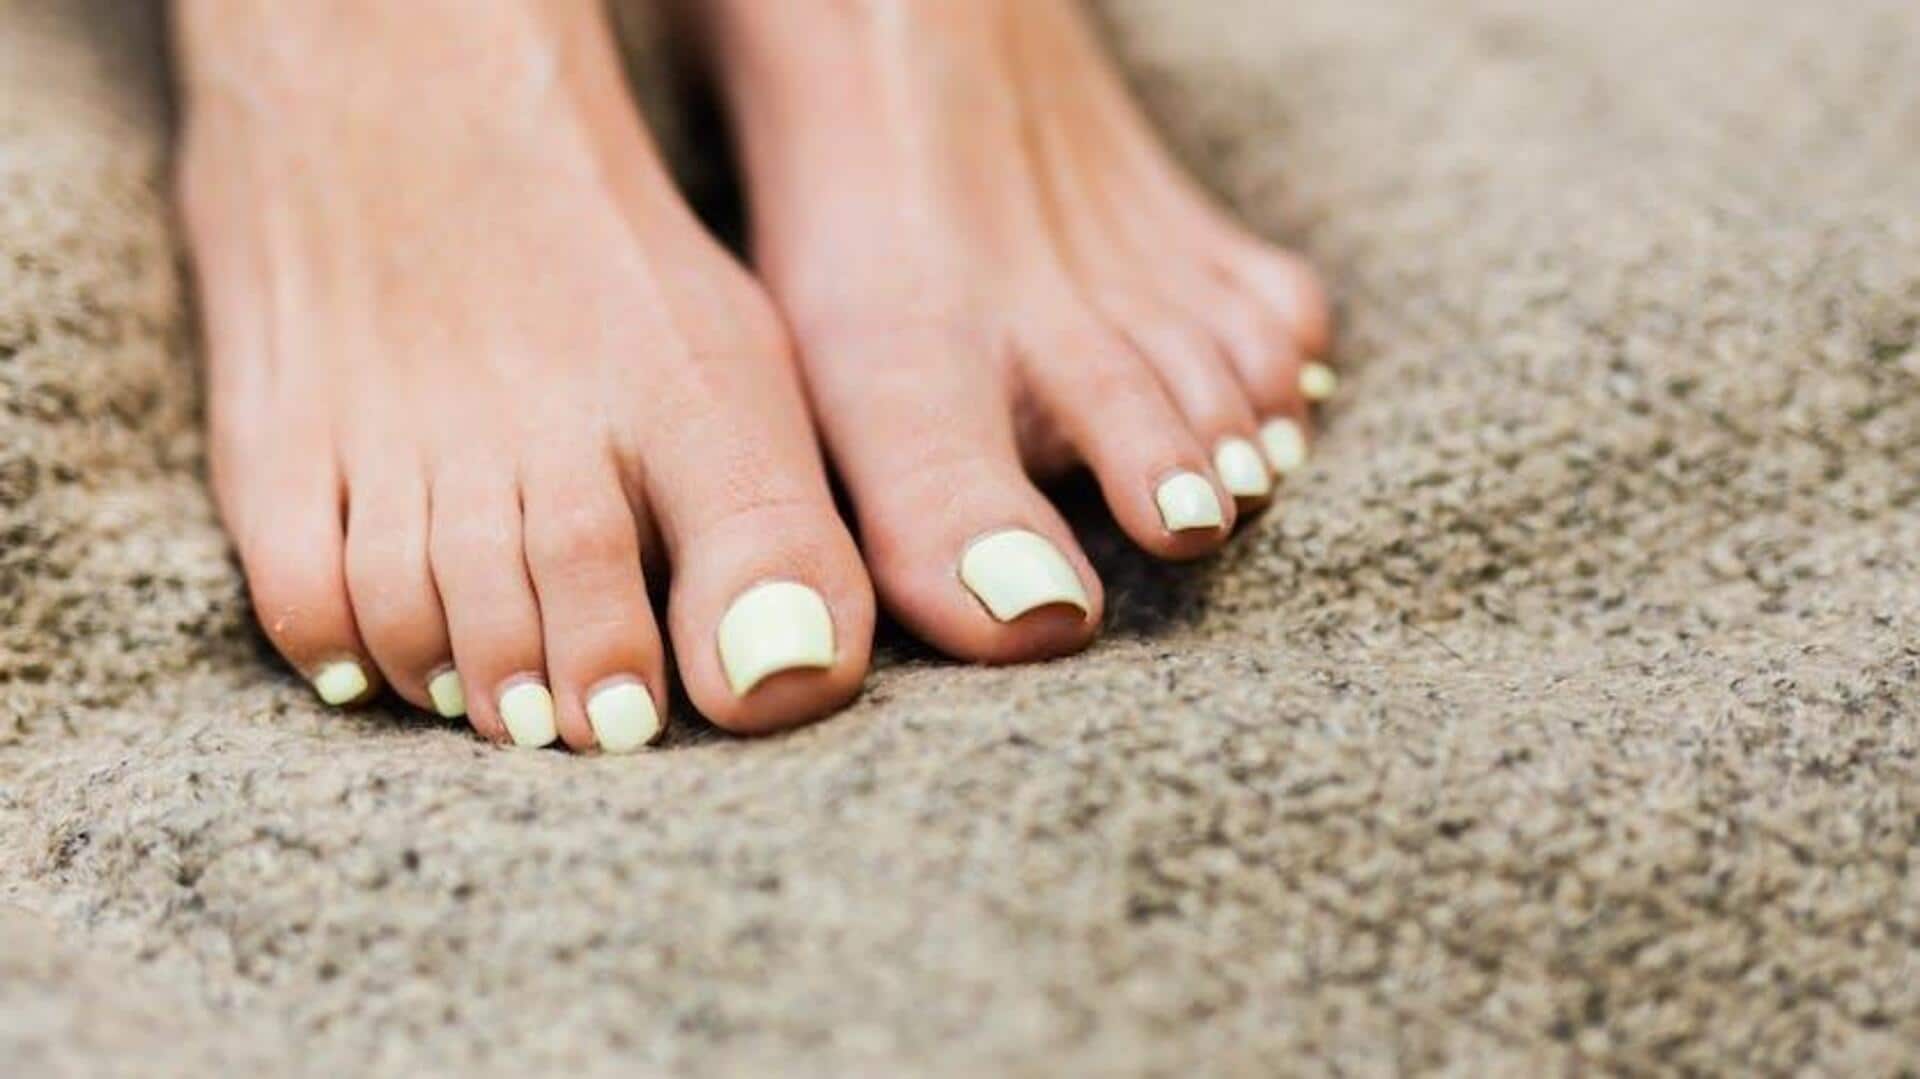 #HealthBytes: Simple steps for DIY pedicure with natural ingredients